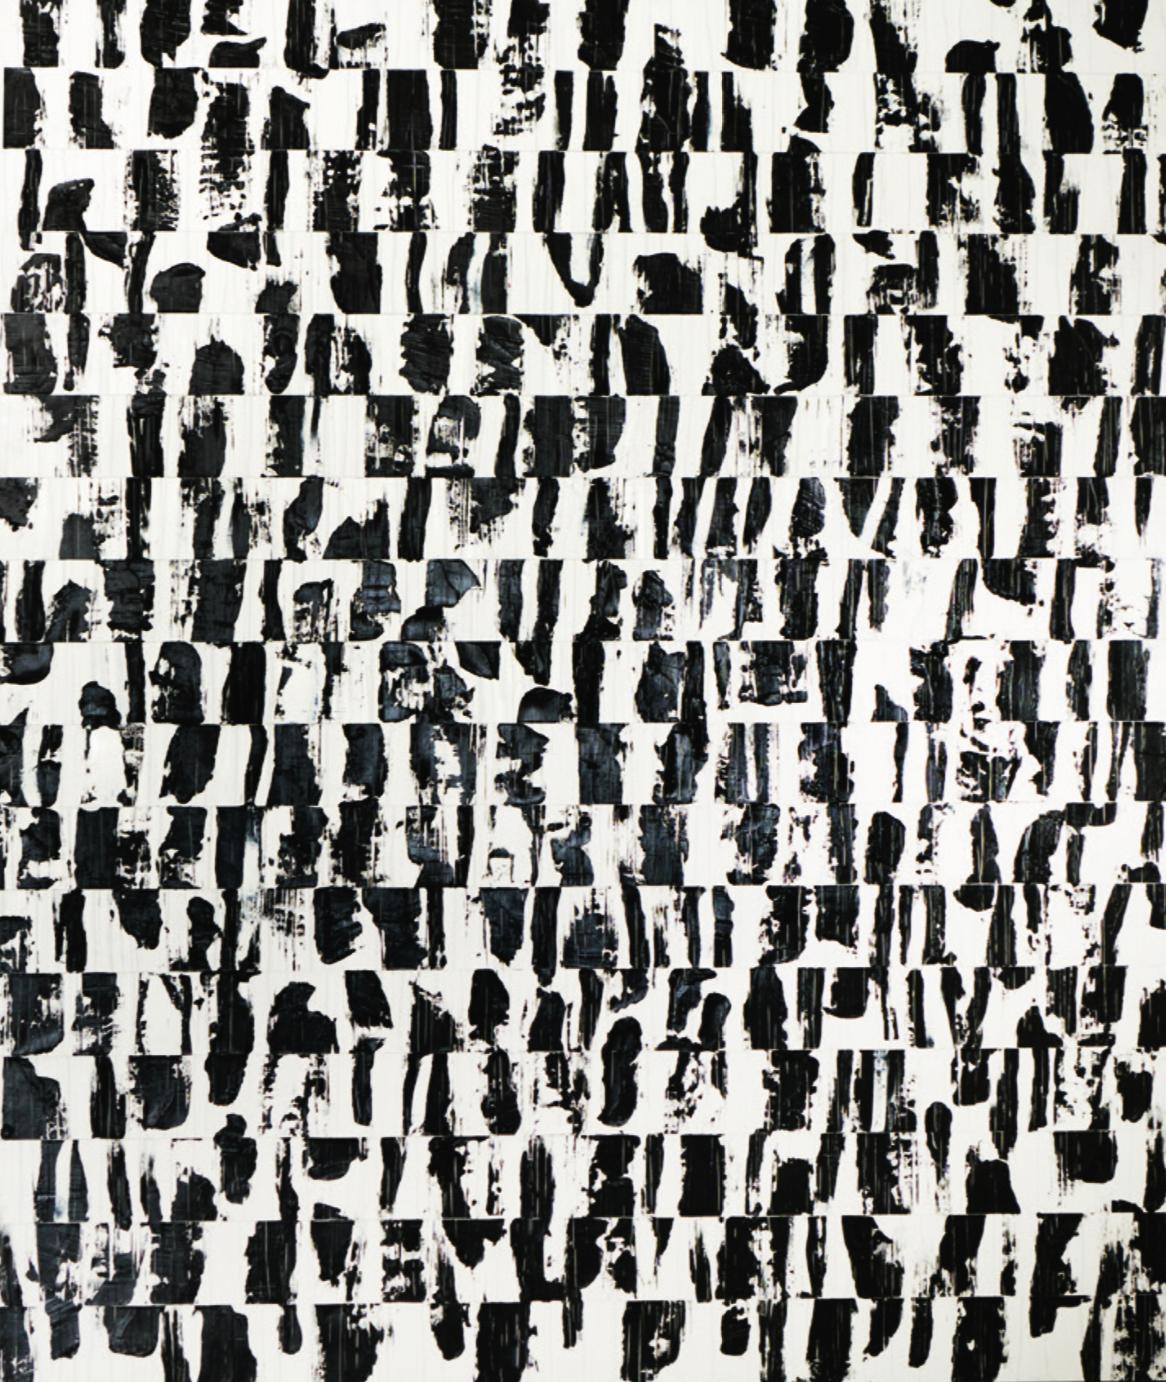 Robert Greene Abstract Painting - "Luc Martin" - abstract black and white painting 